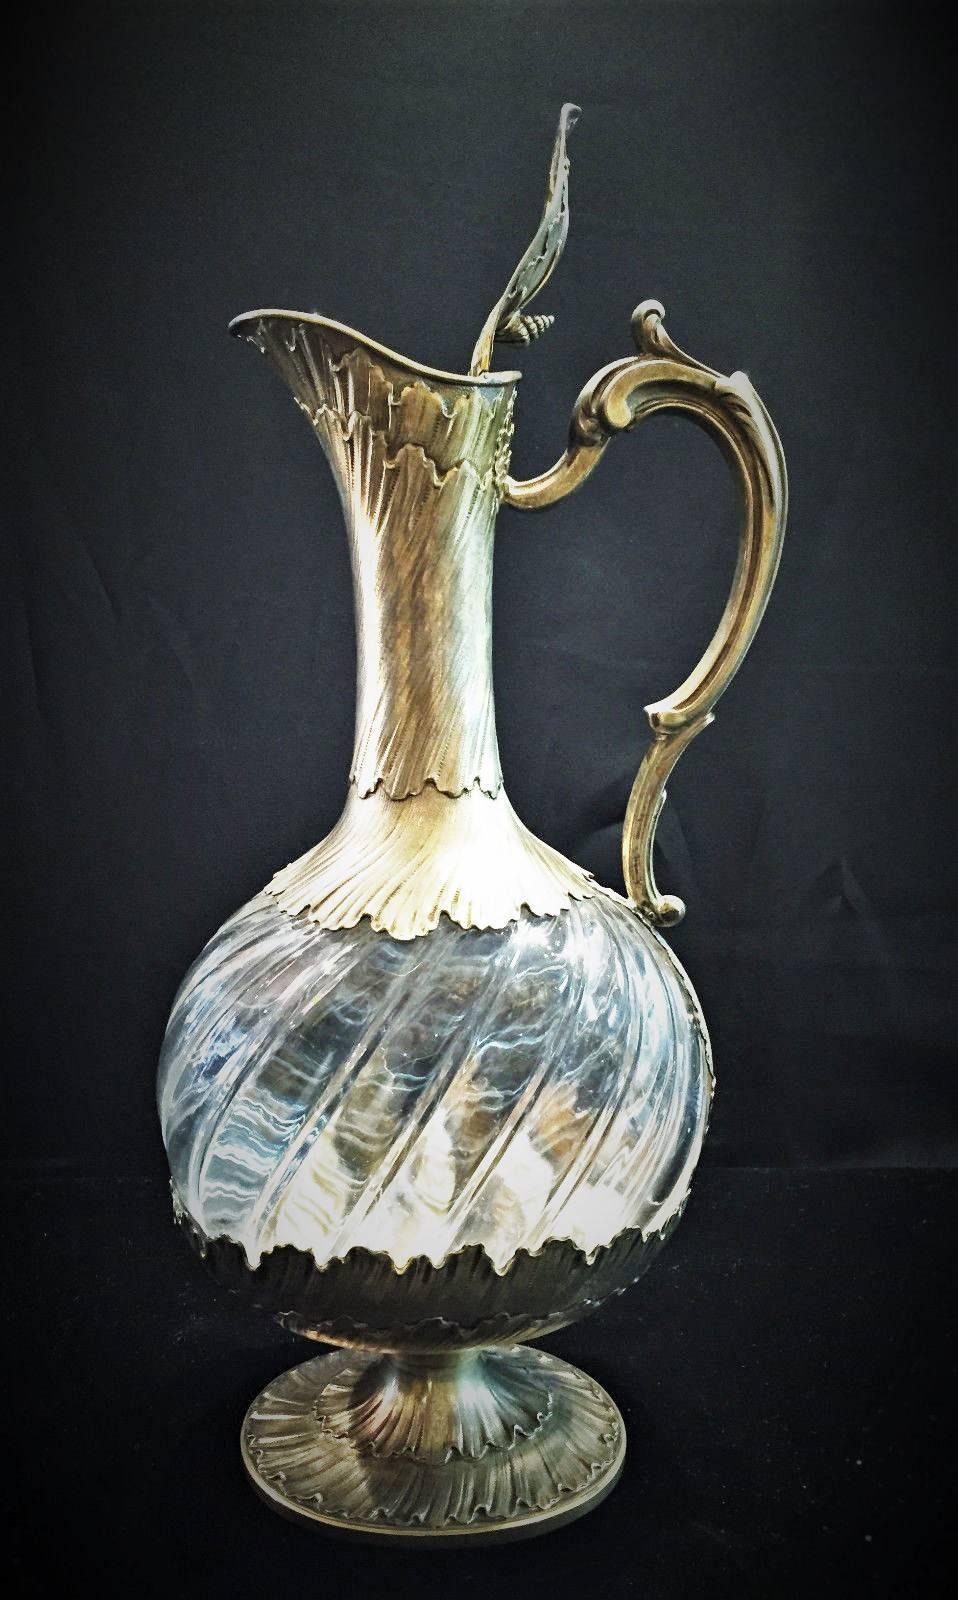 Made in Paris by Maison Odiot circa 1900, this .950 silver-gilt mounted rock crystal claret jug is an extraordinary example of the unique skills of their artisans. What makes it extraordinary is the outstanding design and composition, where the rock